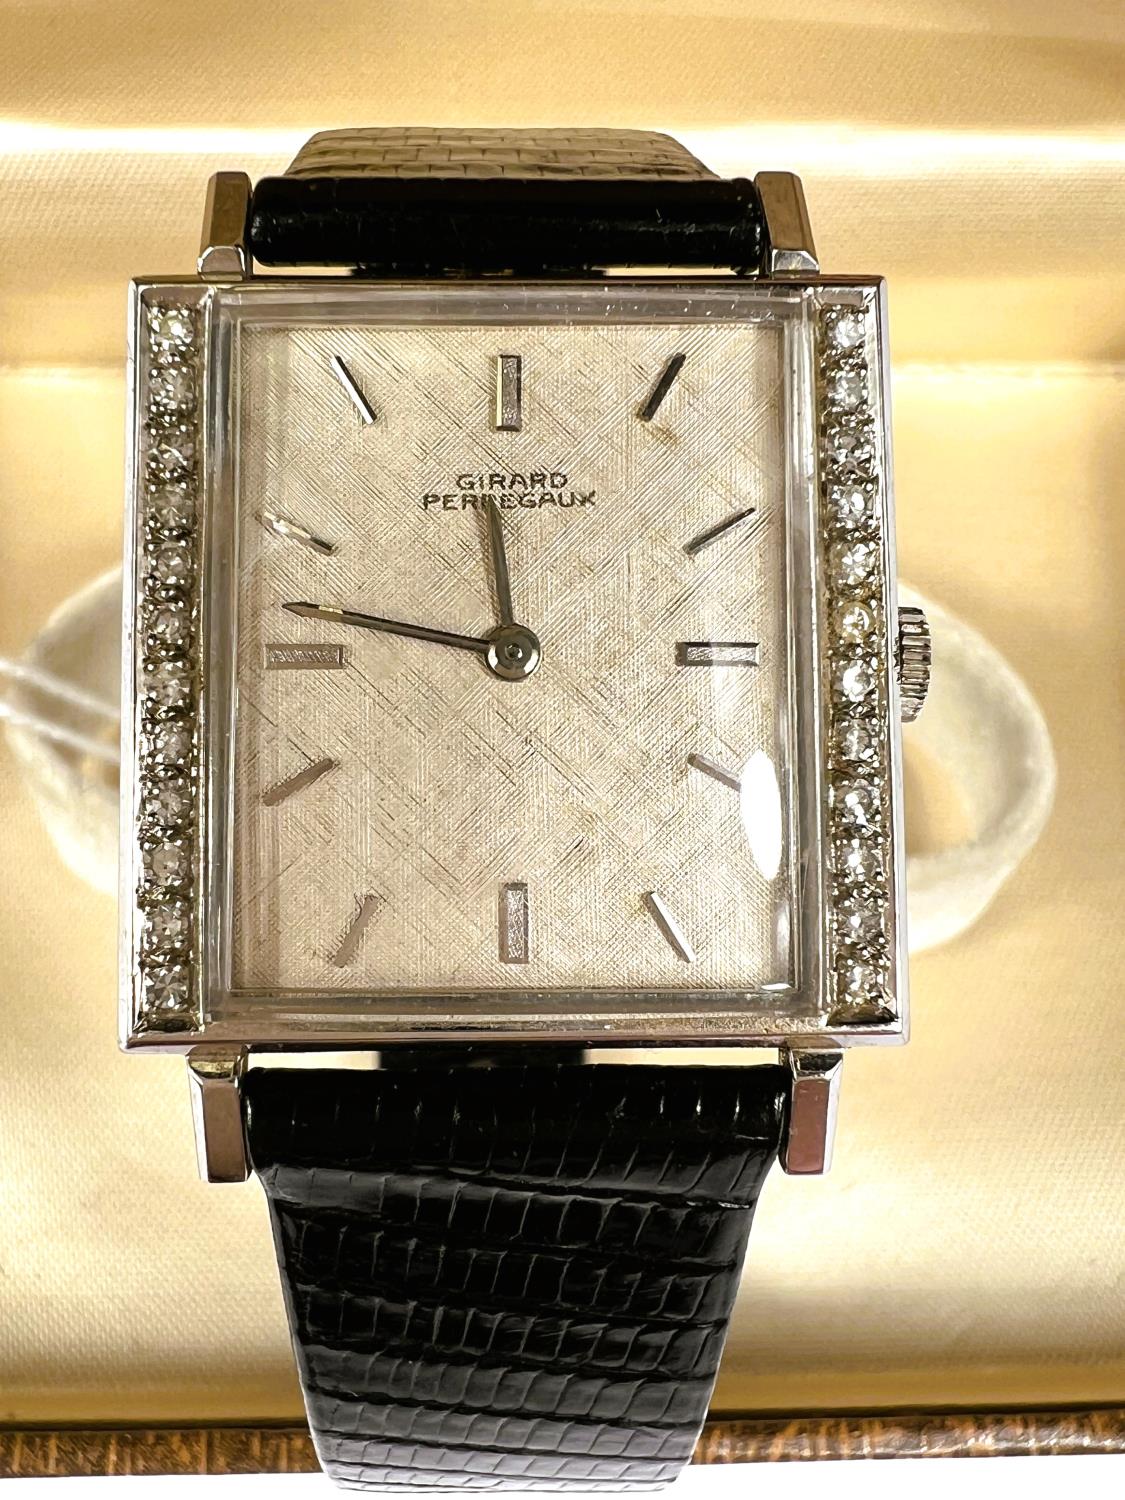 GIRARD PERREGAUX: c. 1970, a white 14ct gold cased rectangular mechanical wrist watch with - Image 2 of 3